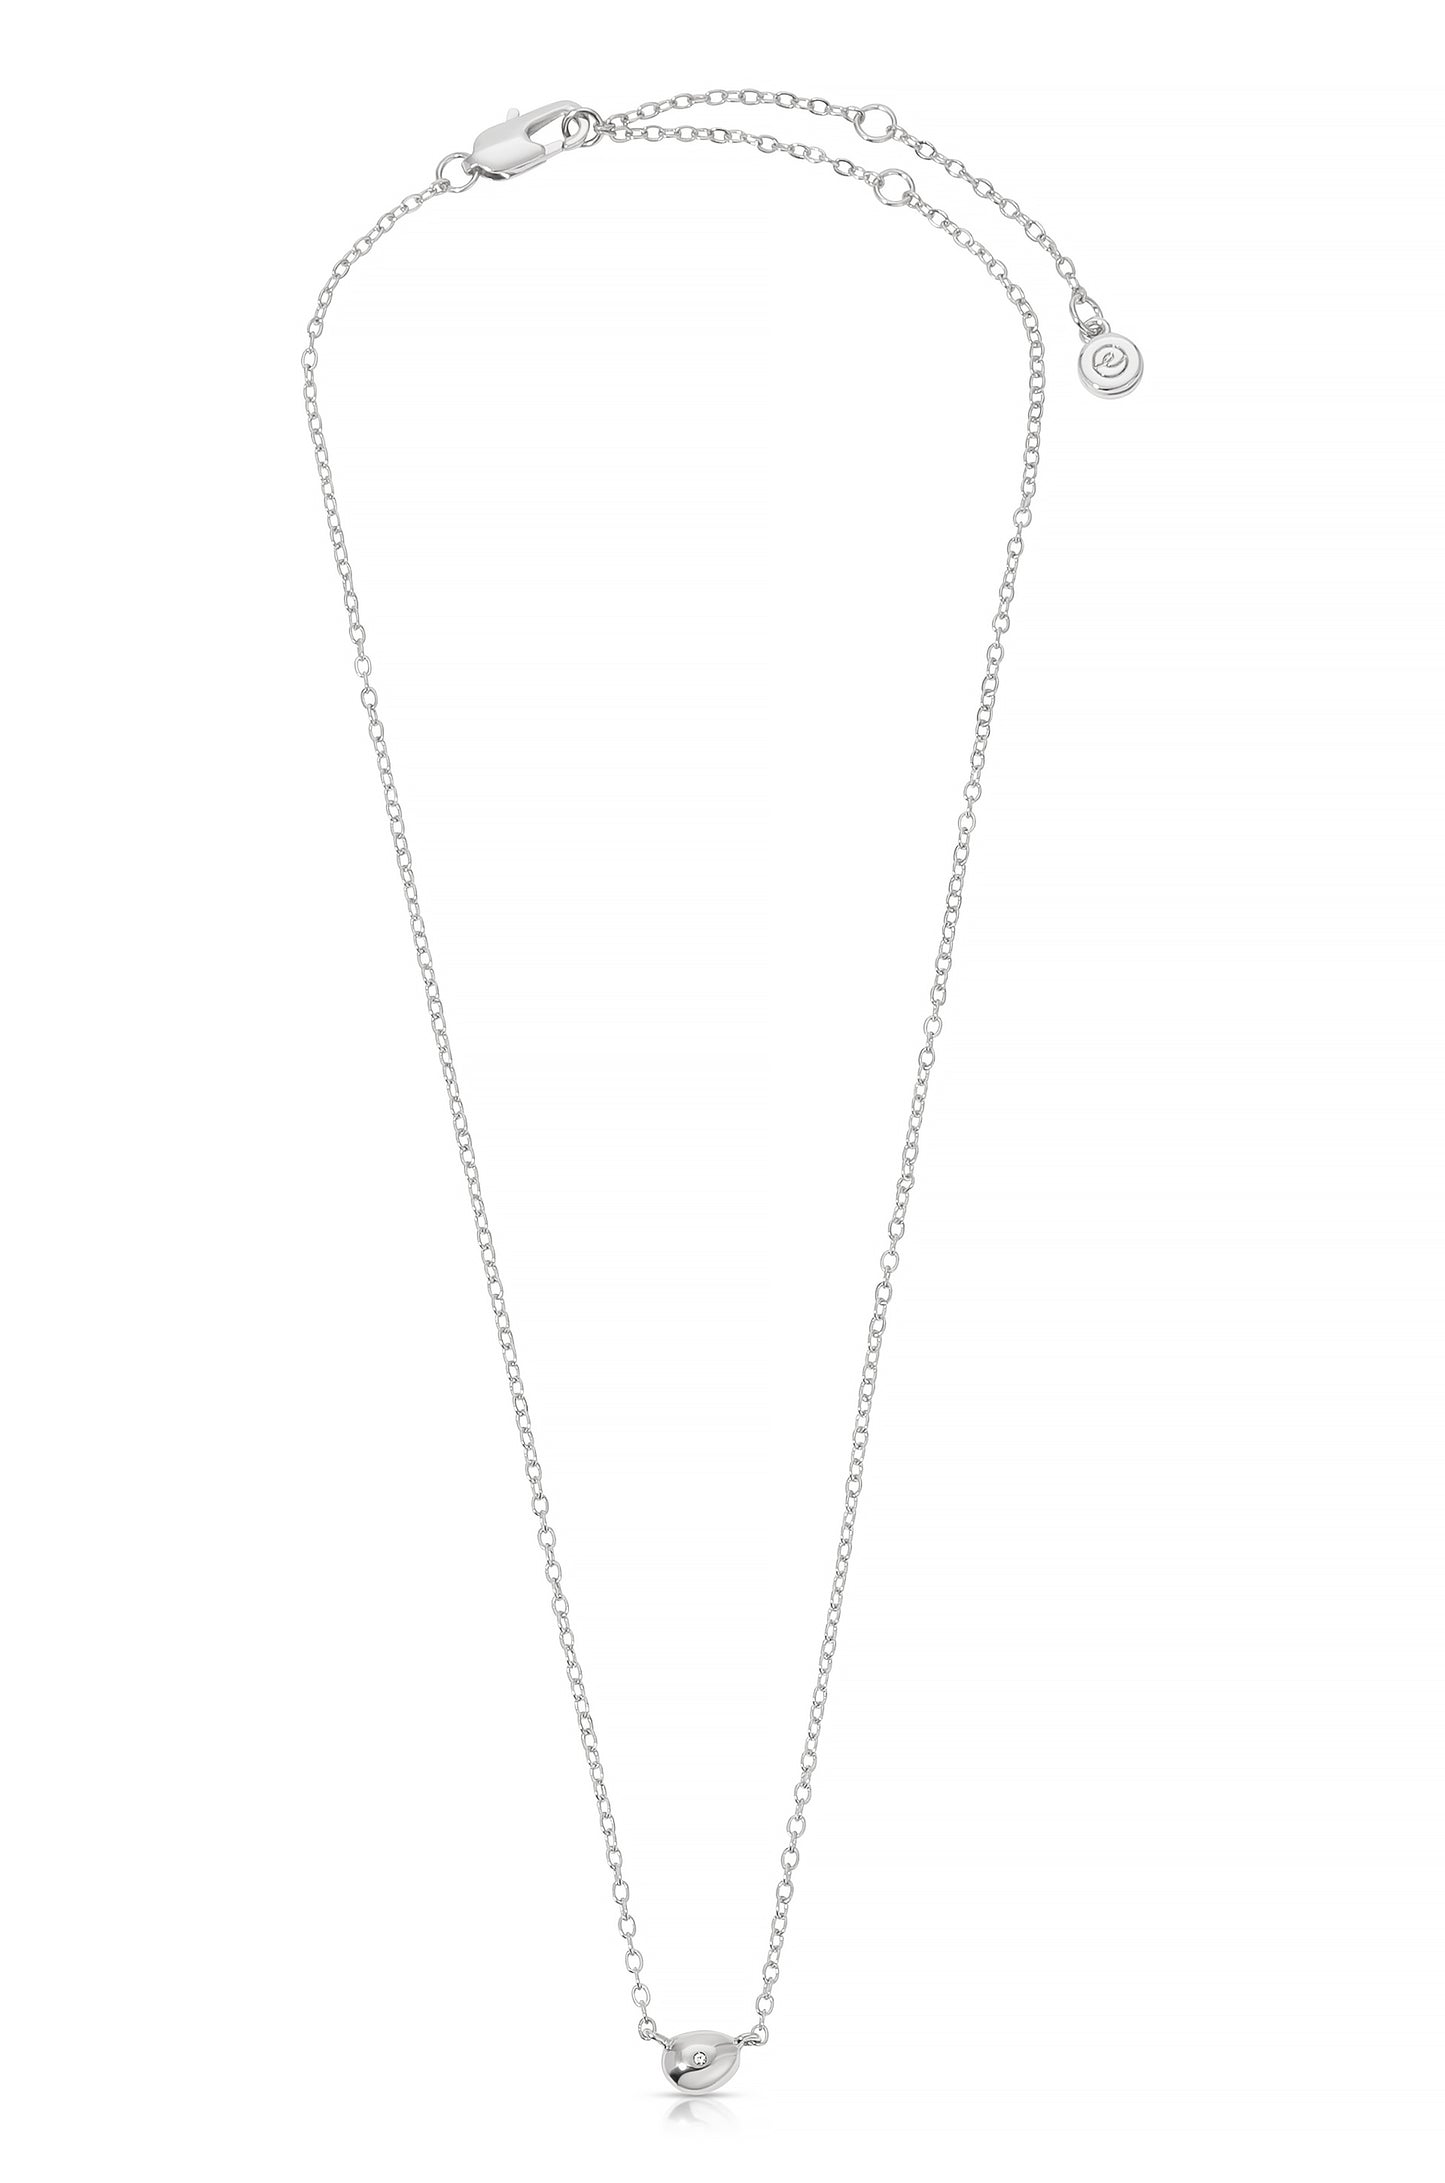 Polished Dainty Pebble Pendant Necklace in rhodium full